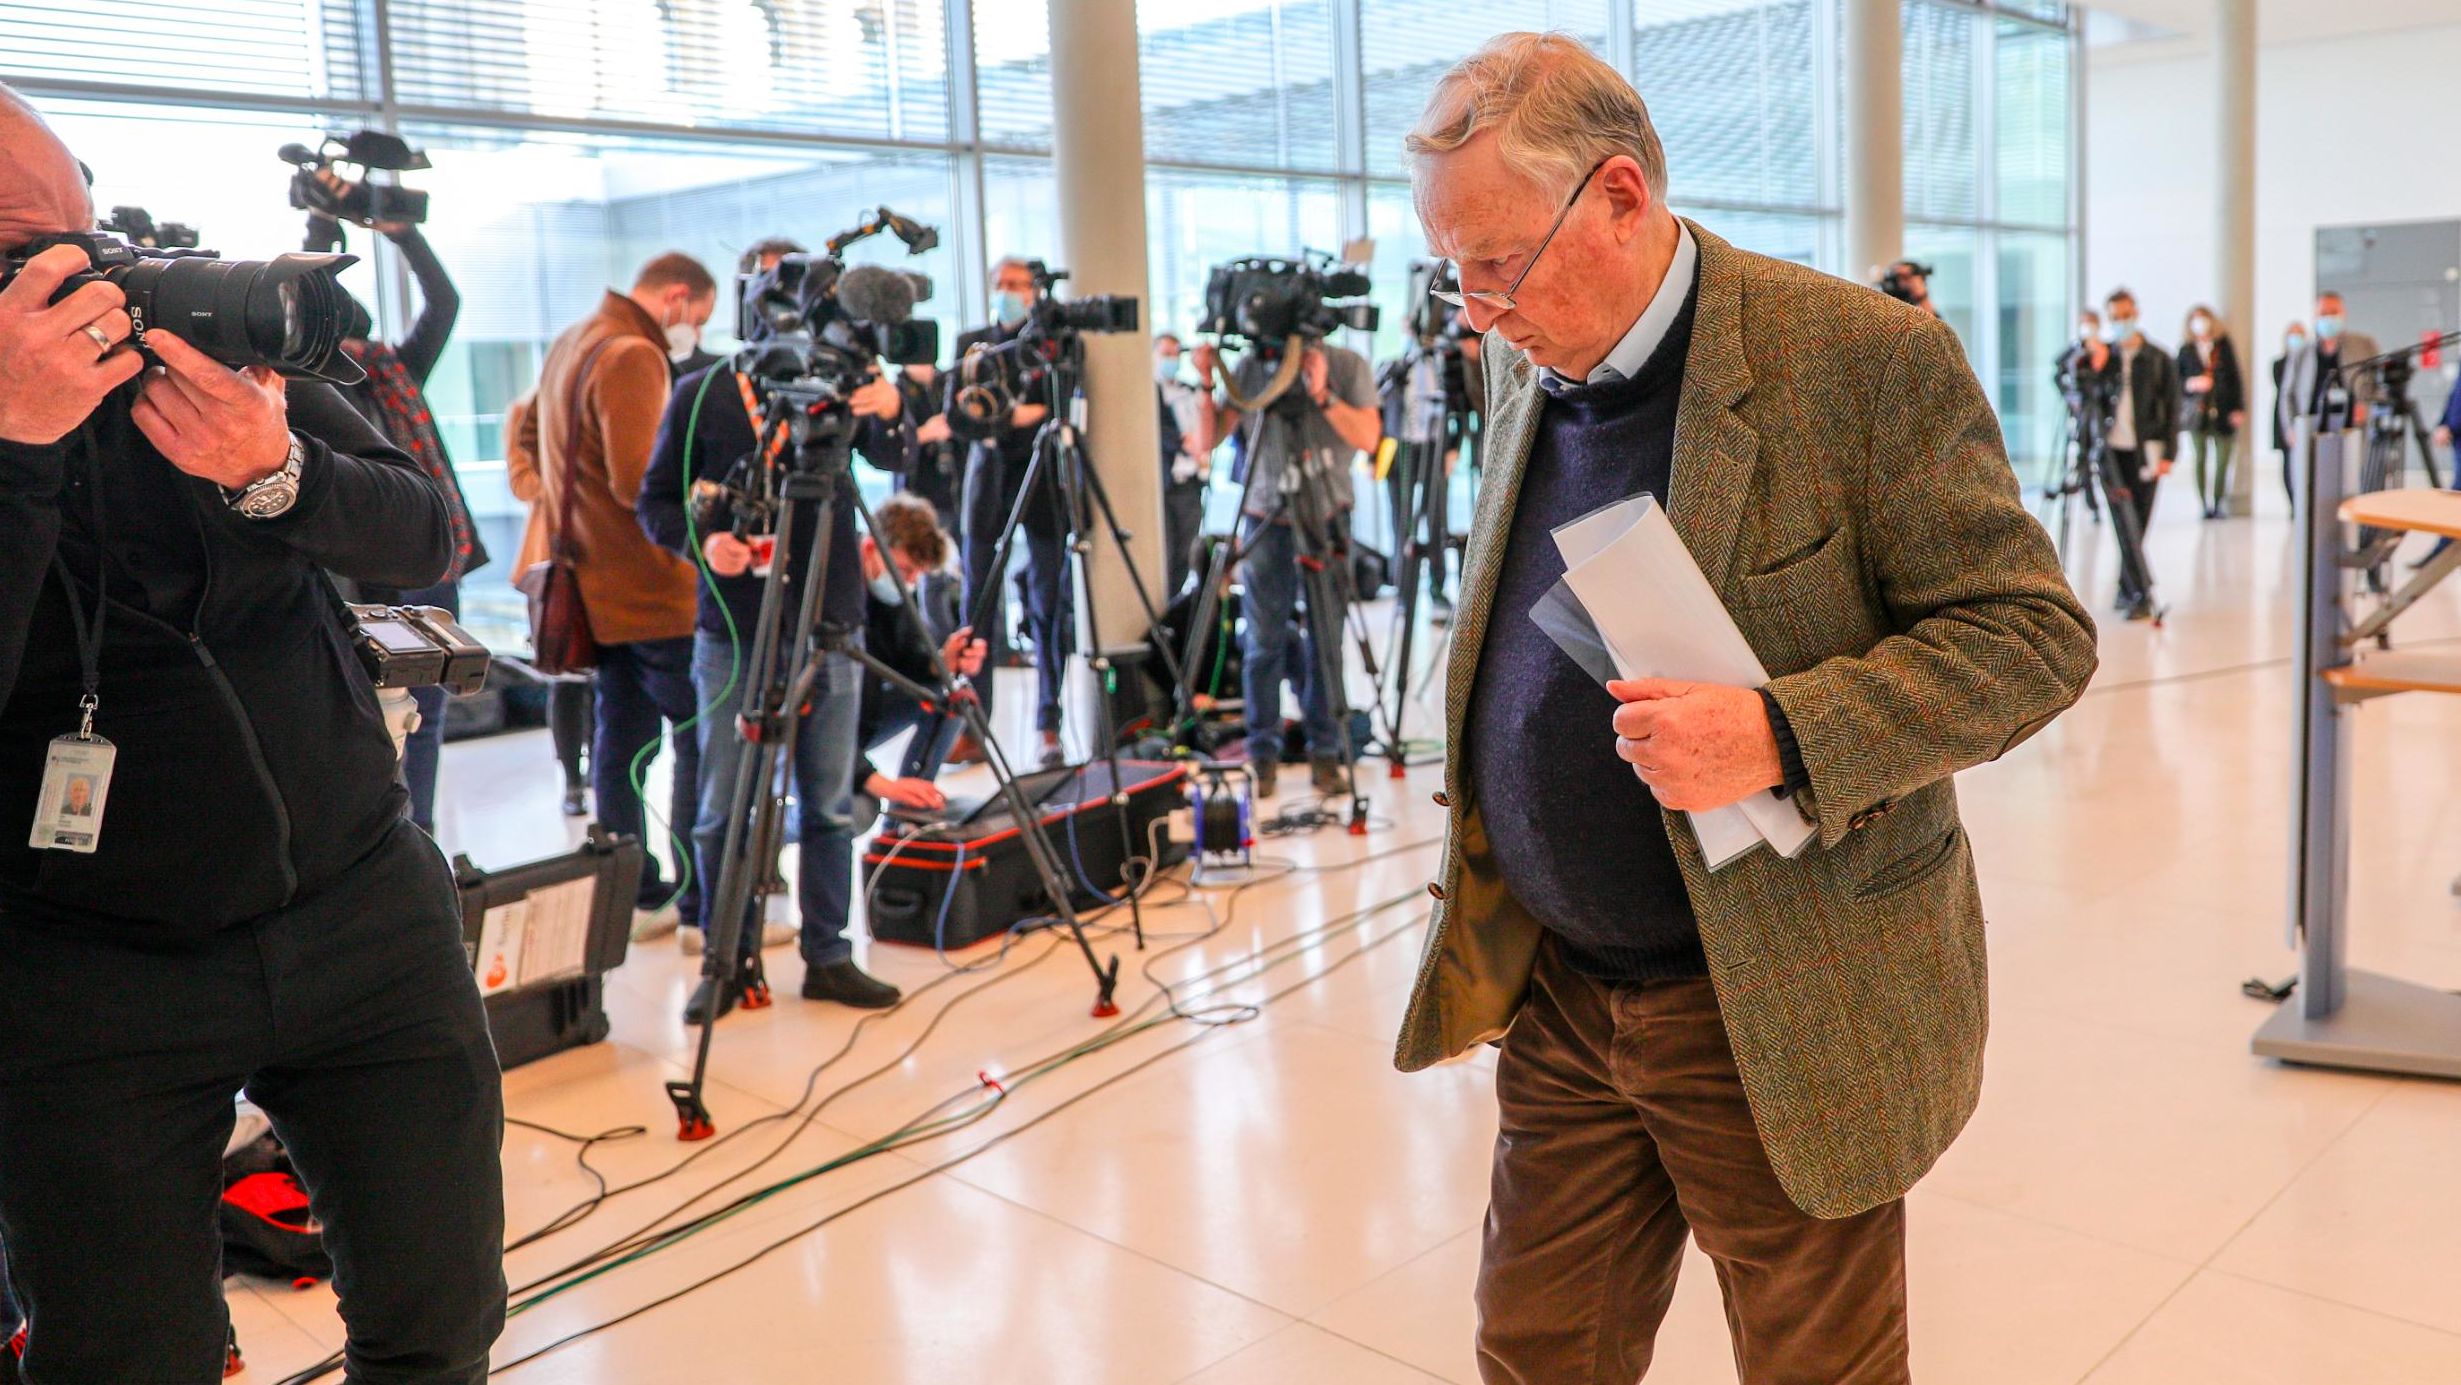 Alexander Gauland, co-Bundestag faction leader of the AfD party, leaves after a press conference on Wednesday.